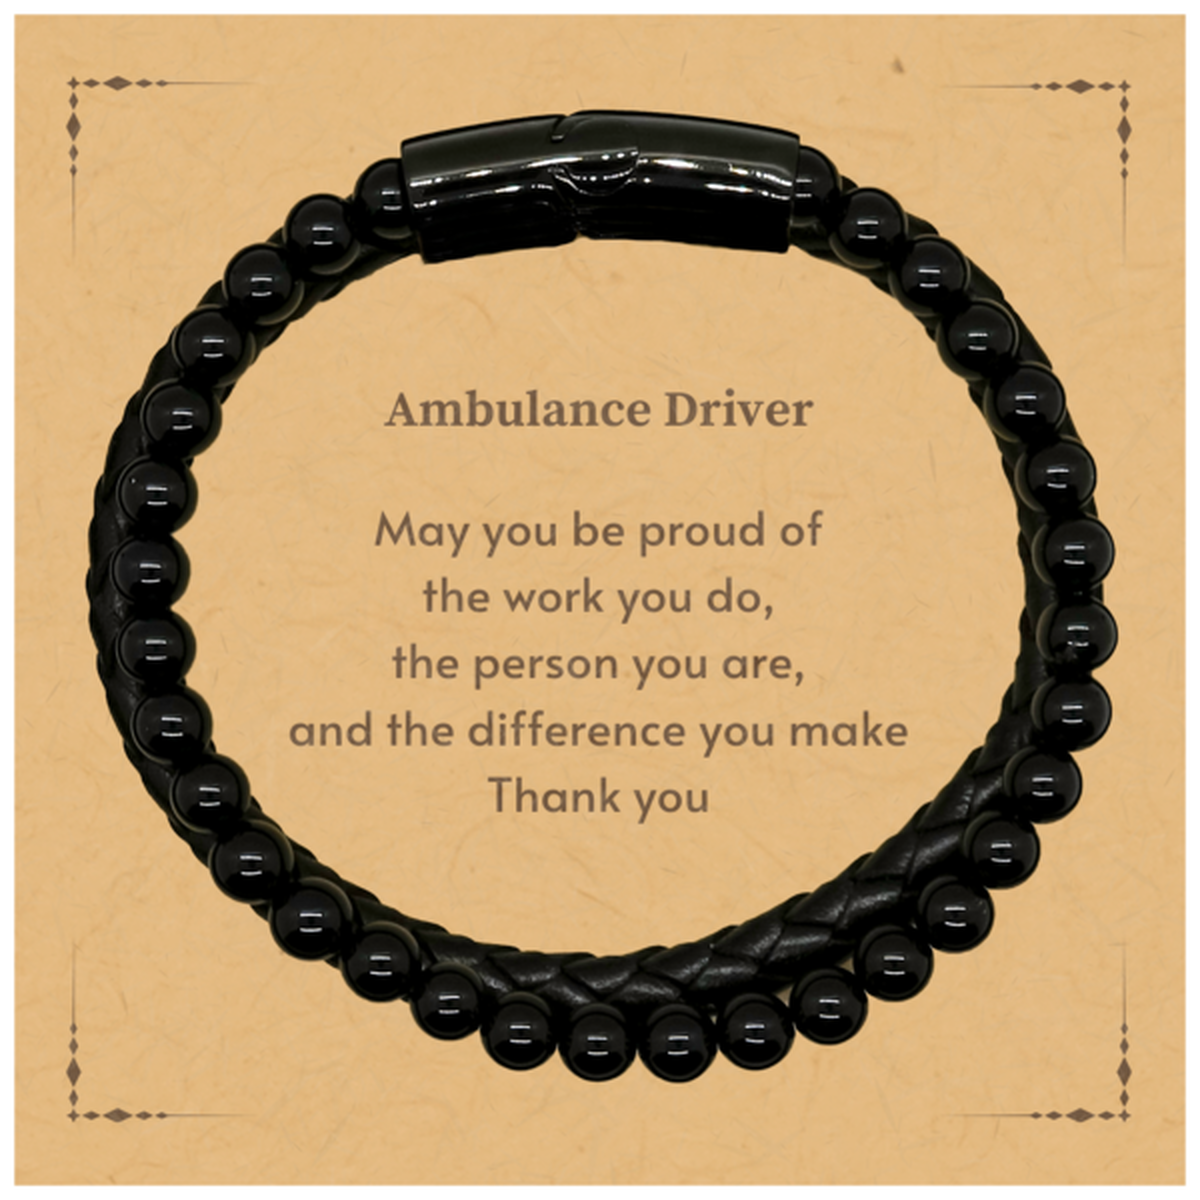 Heartwarming Stone Leather Bracelets Retirement Coworkers Gifts for Ambulance Driver, Ambulance Driver May You be proud of the work you do, the person you are Gifts for Boss Men Women Friends